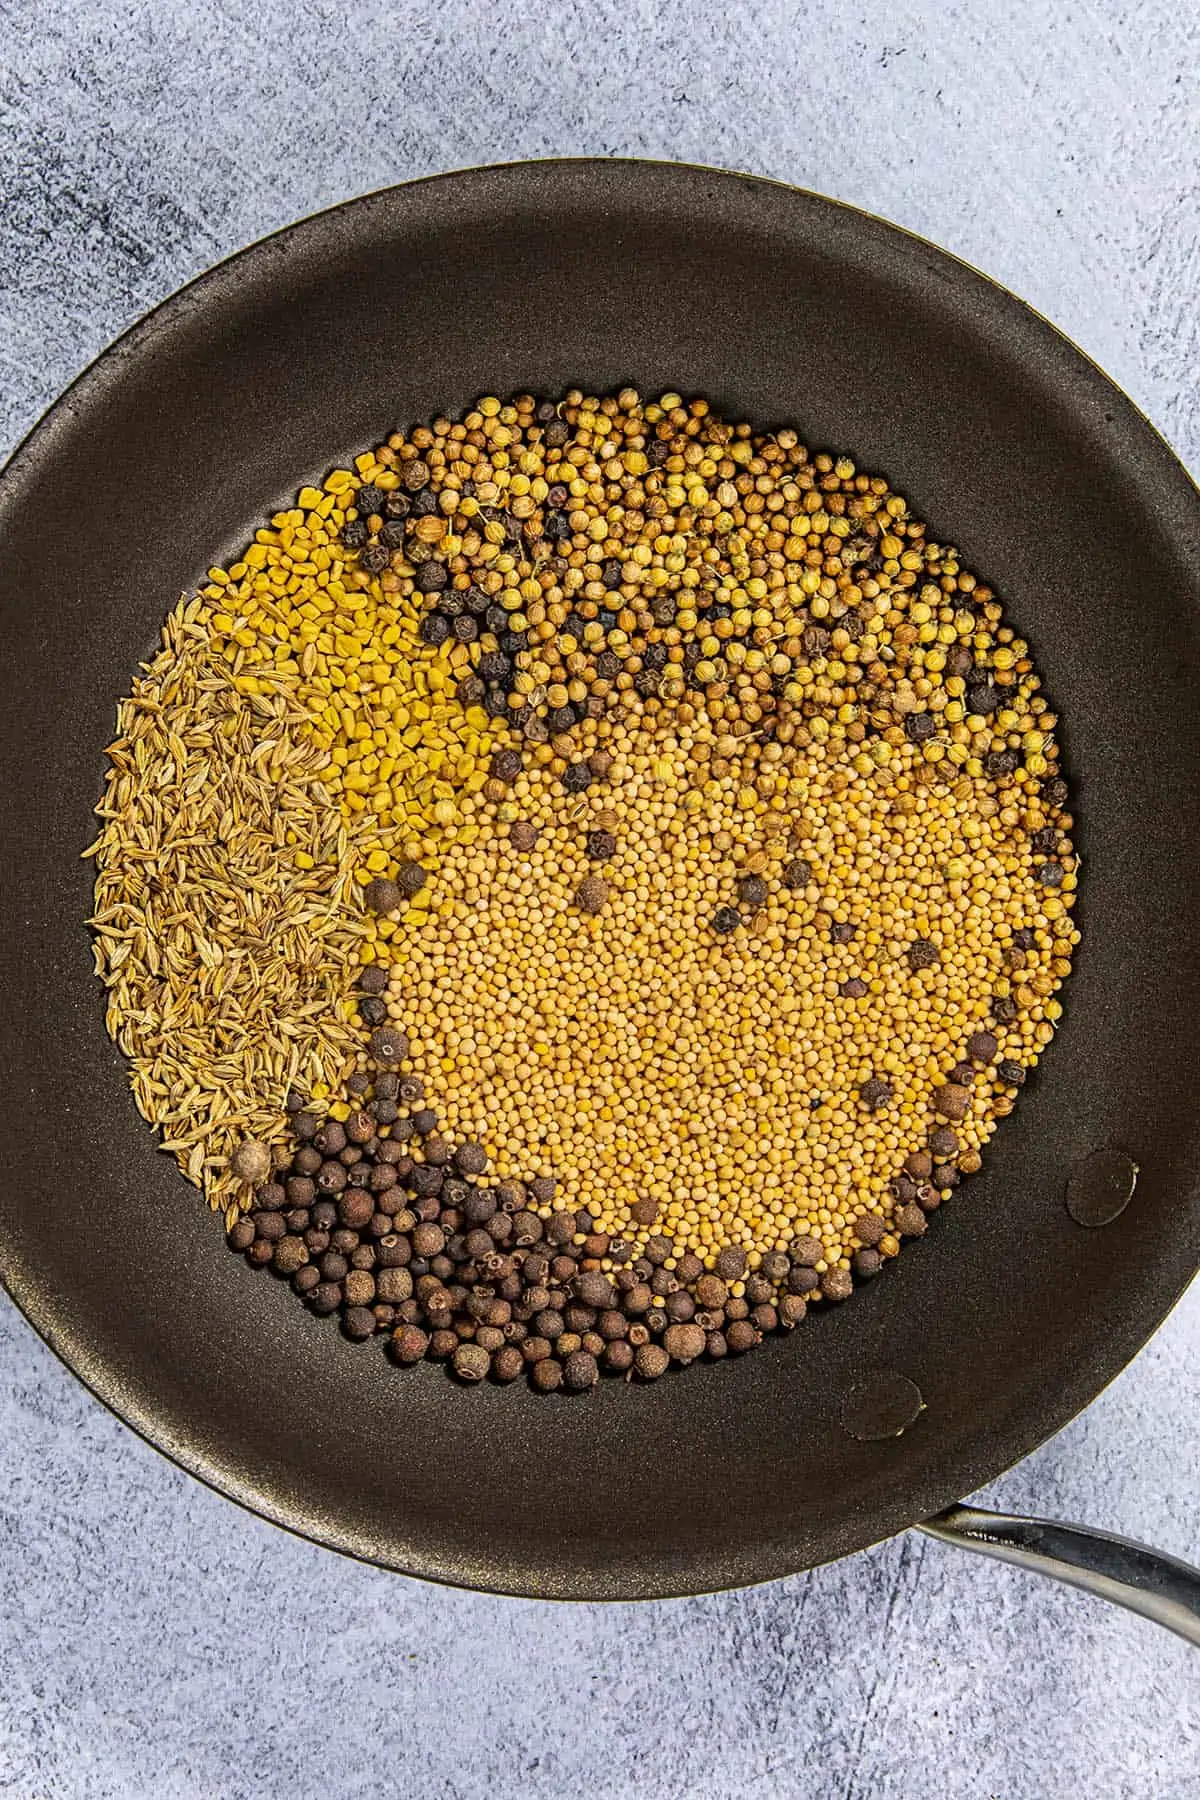 Toasting the seeds and dried berries in a pan to make Jamaican Curry Powder.